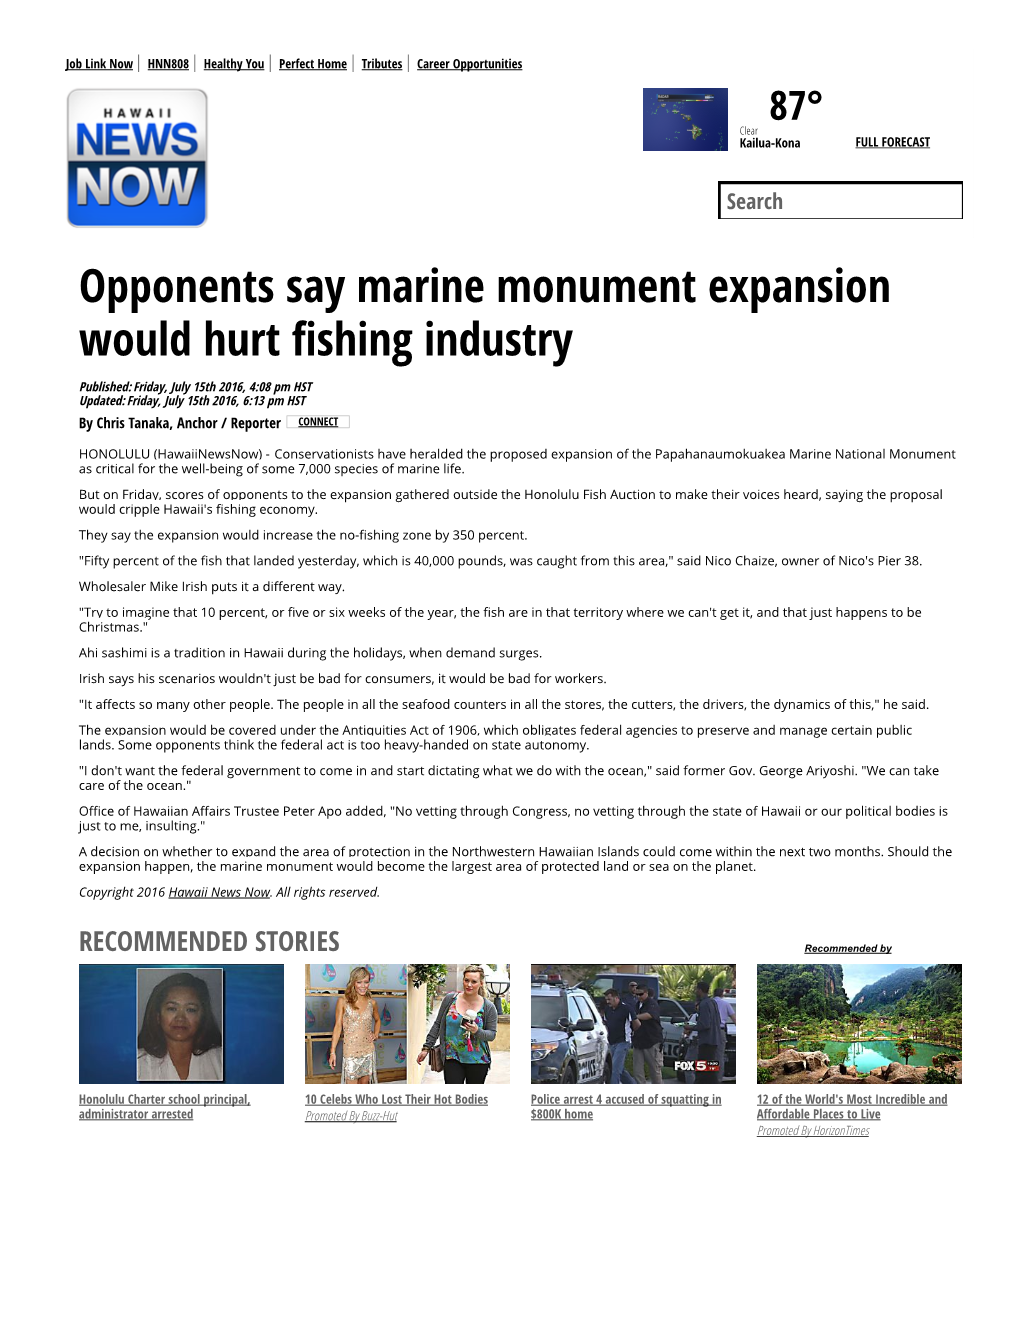 Opponents Say Marine Monument Expansion Would Hurt 䏽滀shing